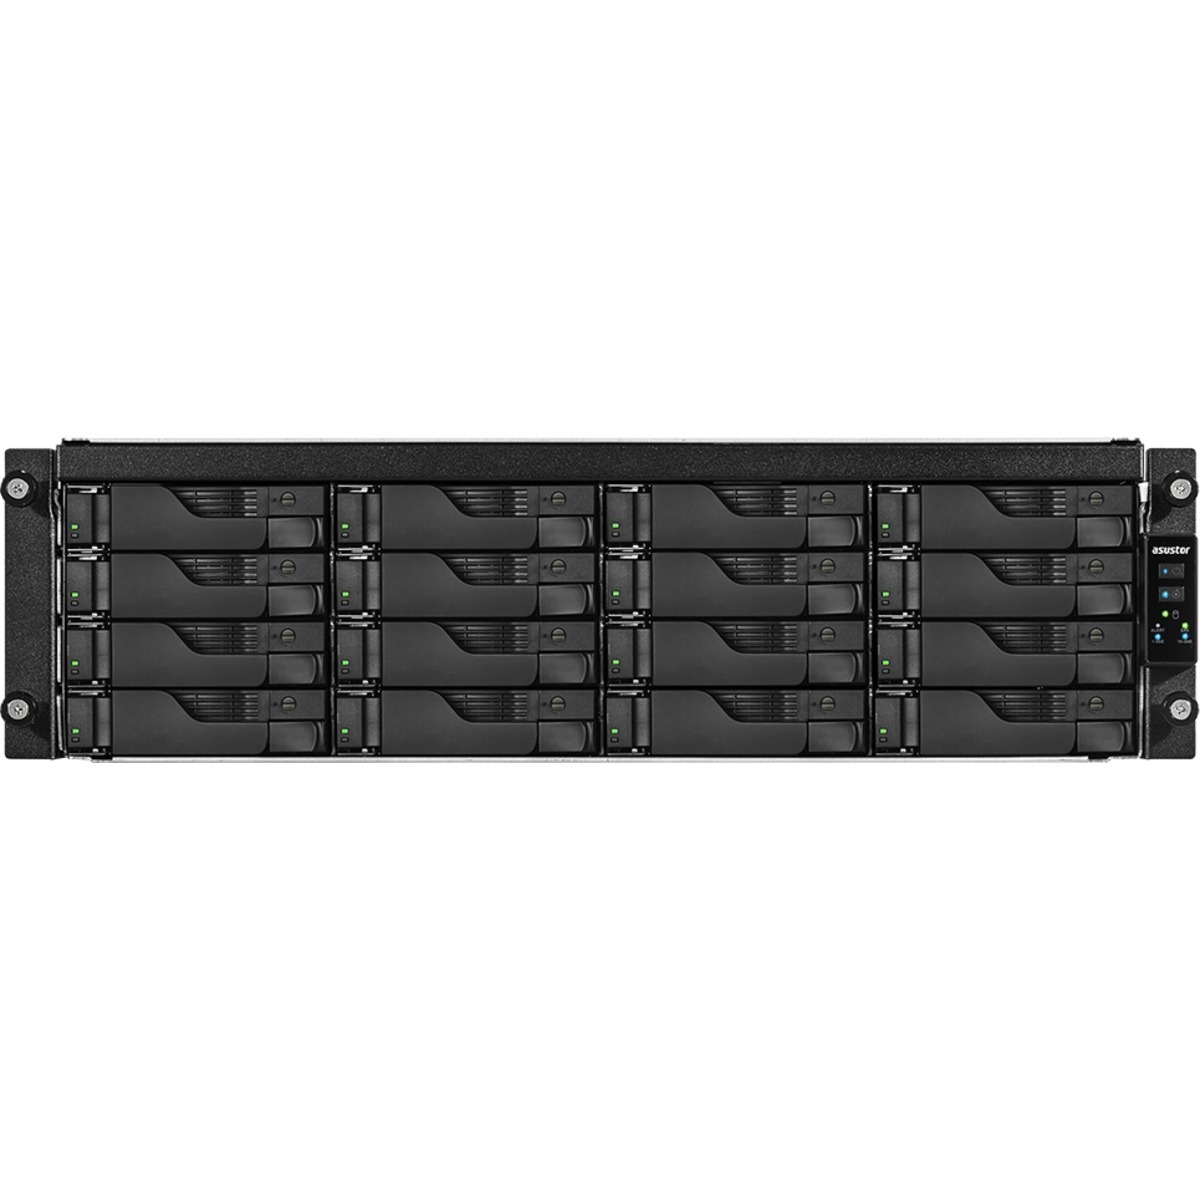 ASUSTOR AS7116RDX Lockerstor 16R Pro 220tb 16-Bay RackMount Large Business / Enterprise NAS - Network Attached Storage Device 11x20tb Seagate EXOS X20 ST20000NM007D 3.5 7200rpm SATA 6Gb/s HDD ENTERPRISE Class Drives Installed - Burn-In Tested AS7116RDX Lockerstor 16R Pro